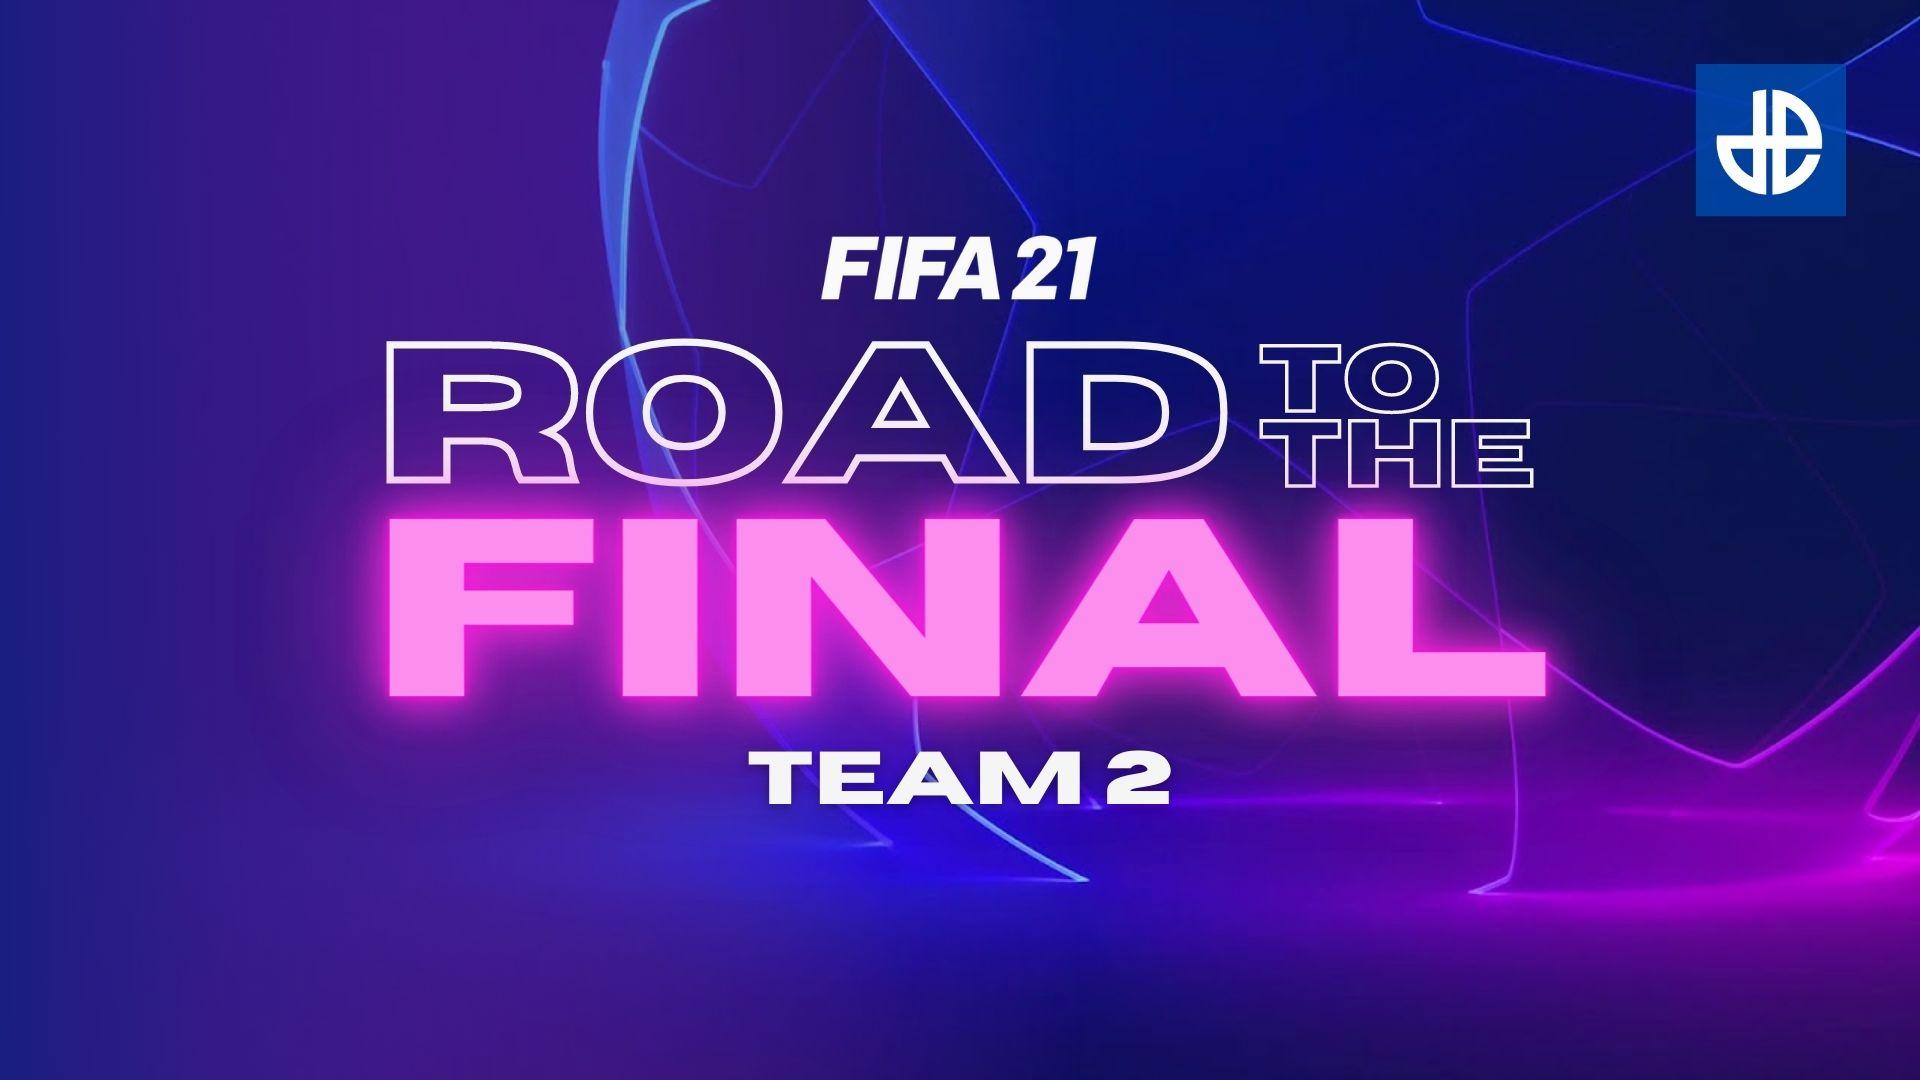 FIFA 21 Road to the Final Team 2 promo image.